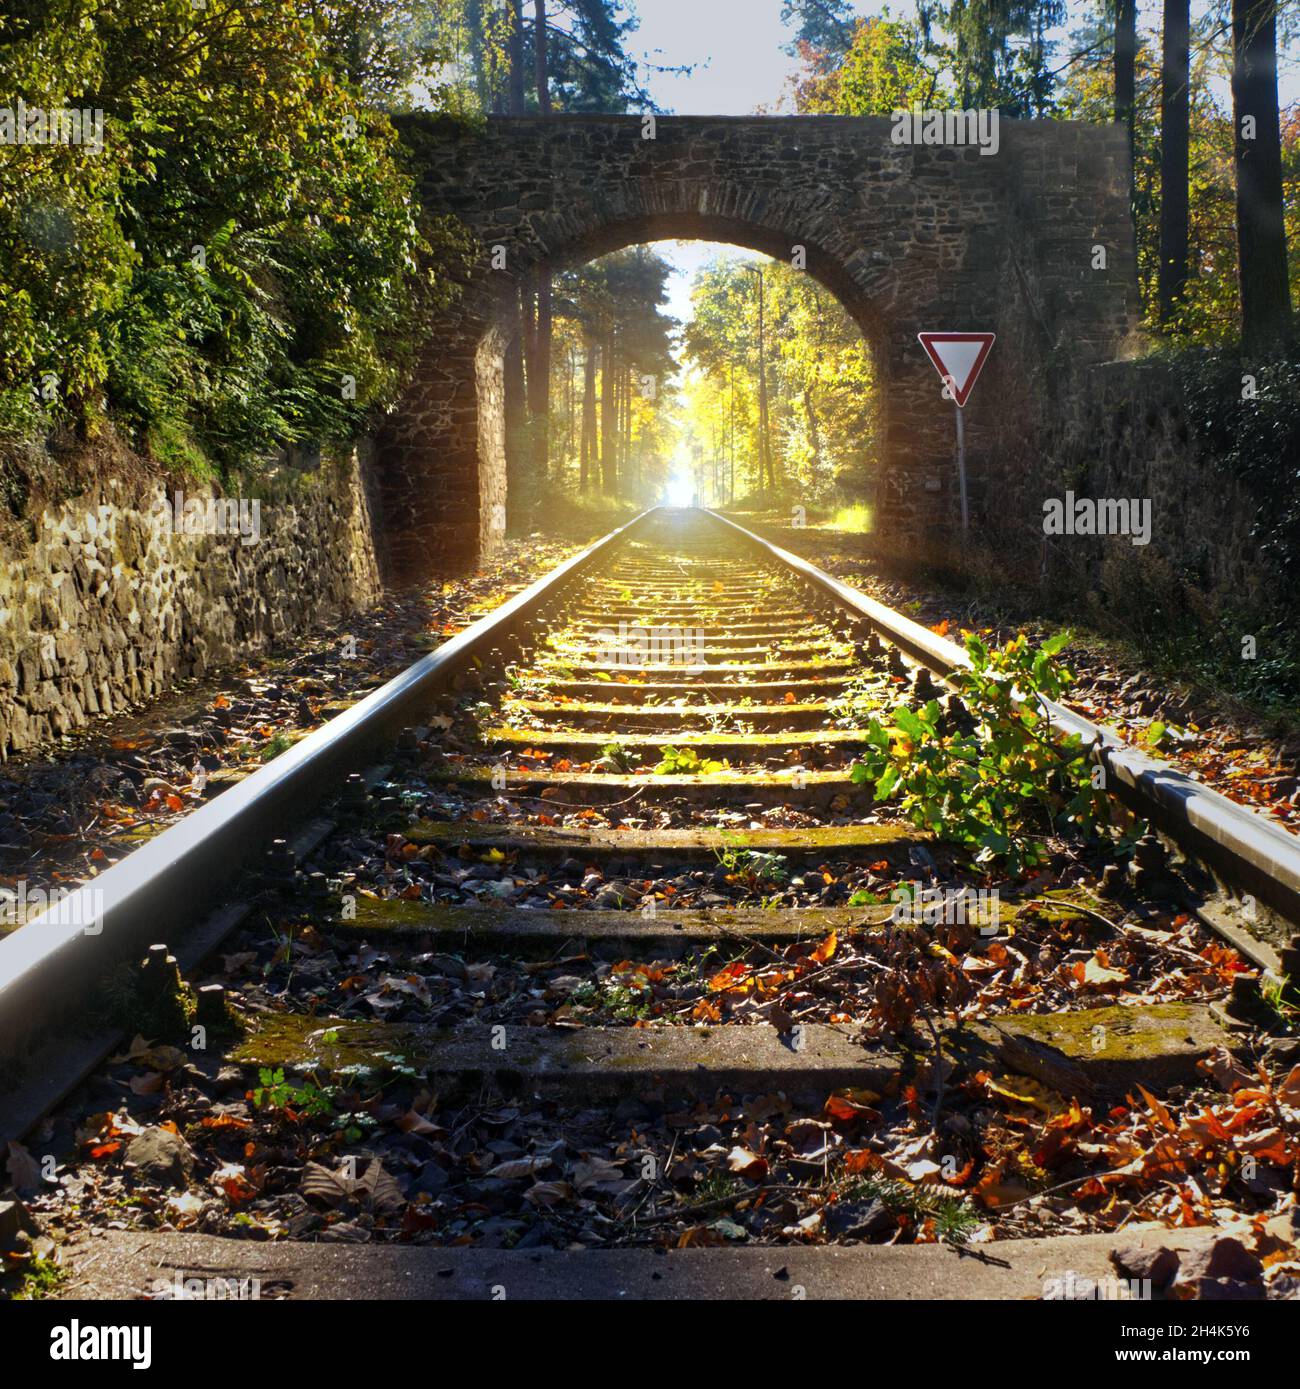 Rails lead in central perspective through an old arched gate made of natural stone to the glistening sun in the background, composite image Stock Photo